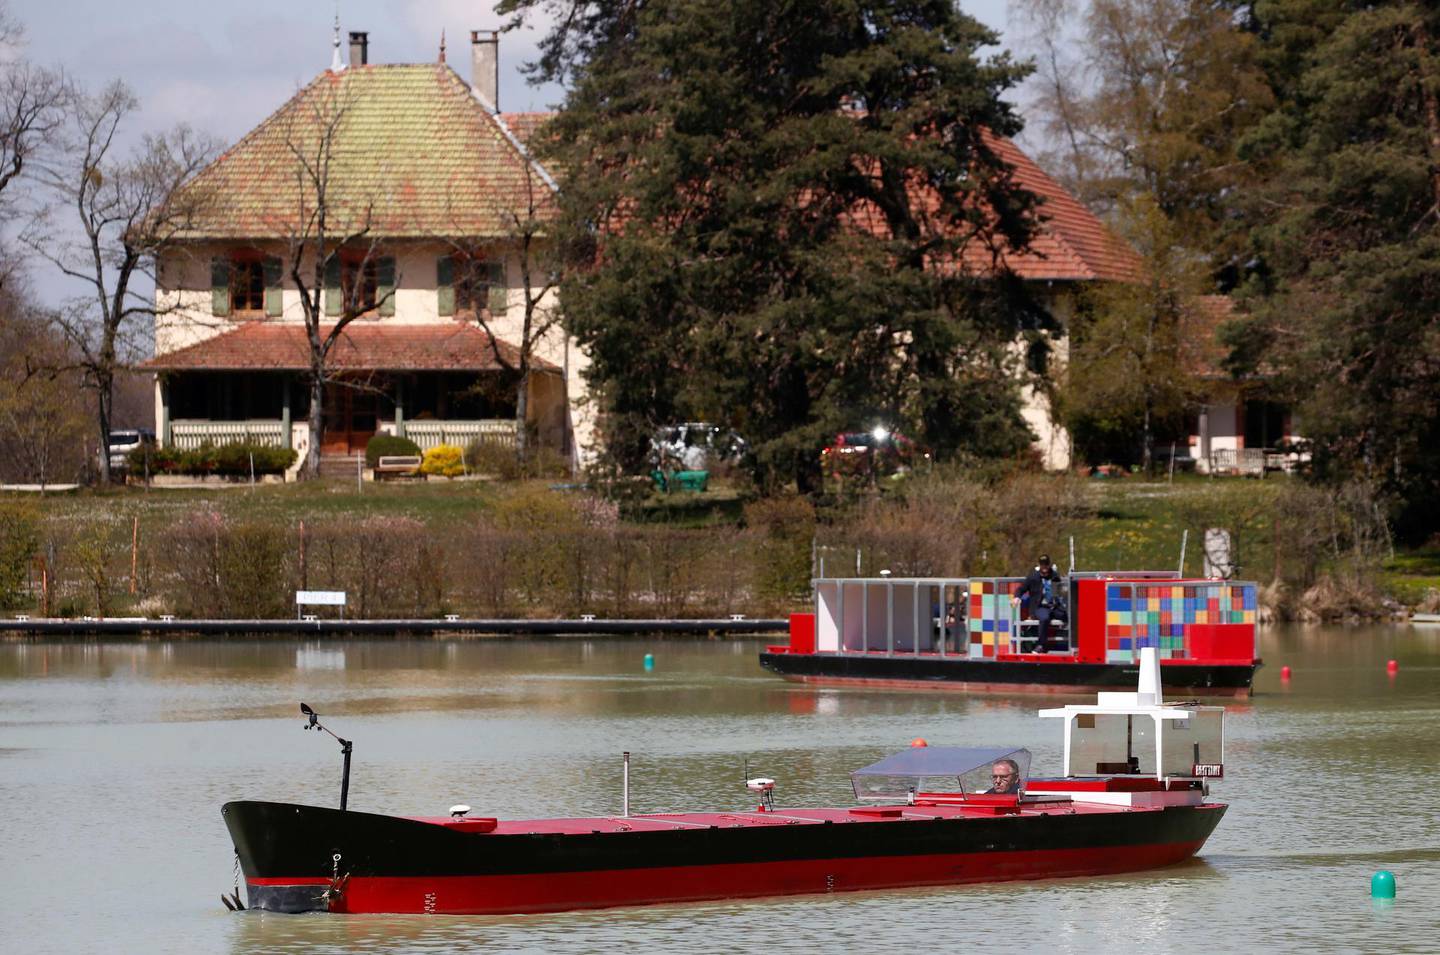 Francois Mayor, managing director of Port Revel, steers a scaled-down model of a tanker, named the Brittany, on a lake at the Port Revel Shiphandling Training Centre in Saint-Pierre-de-Bressieux, France, April 19, 2021. Picture taken April 19, 2021. REUTERS/Stephane Mahe